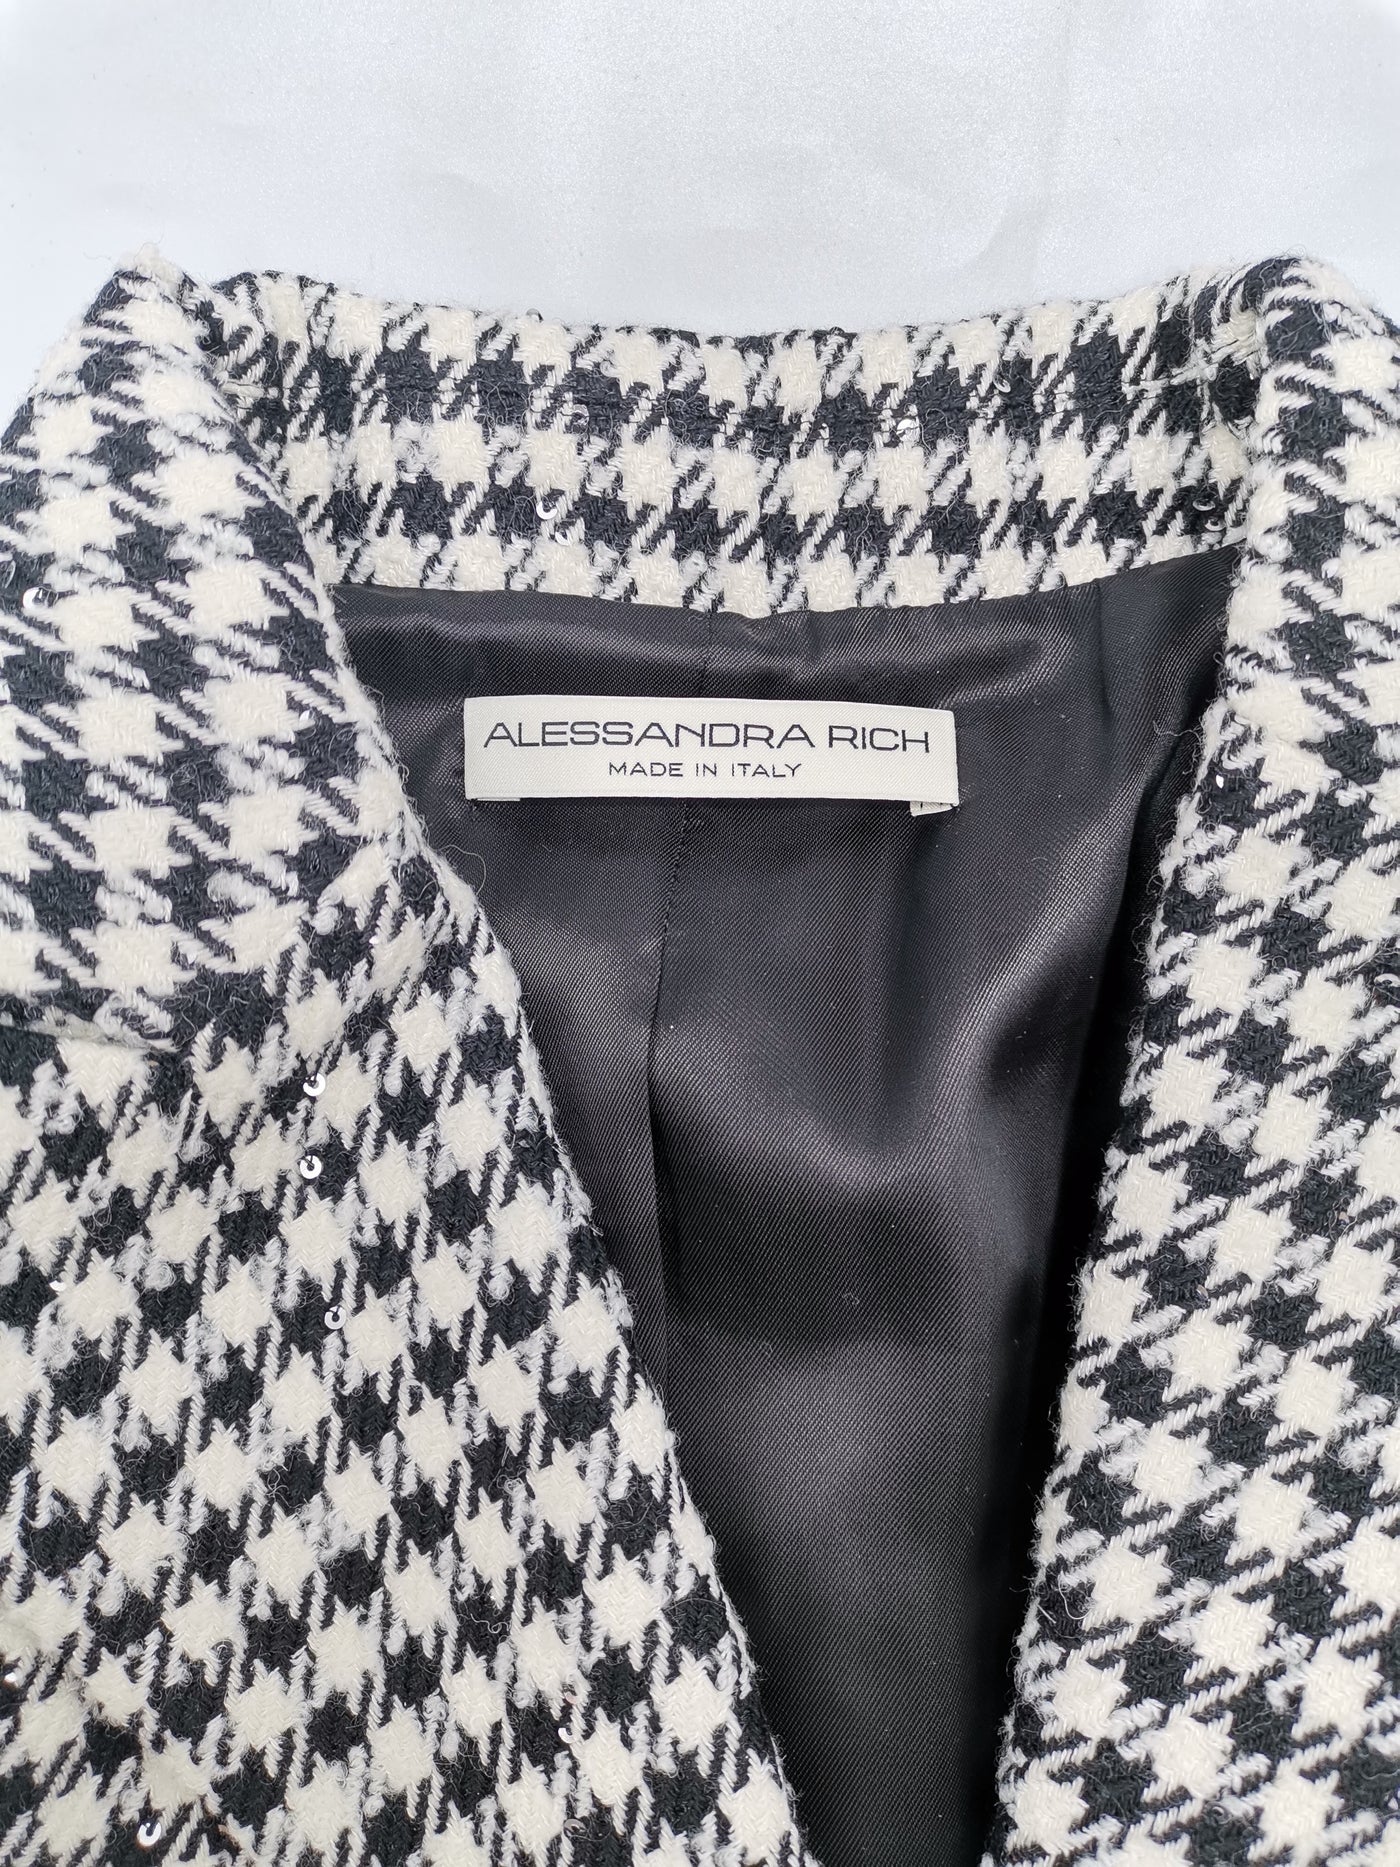 ALESSANDRA RICH Houndstooth sequin crystals jacket size 8uk RRP: $1675